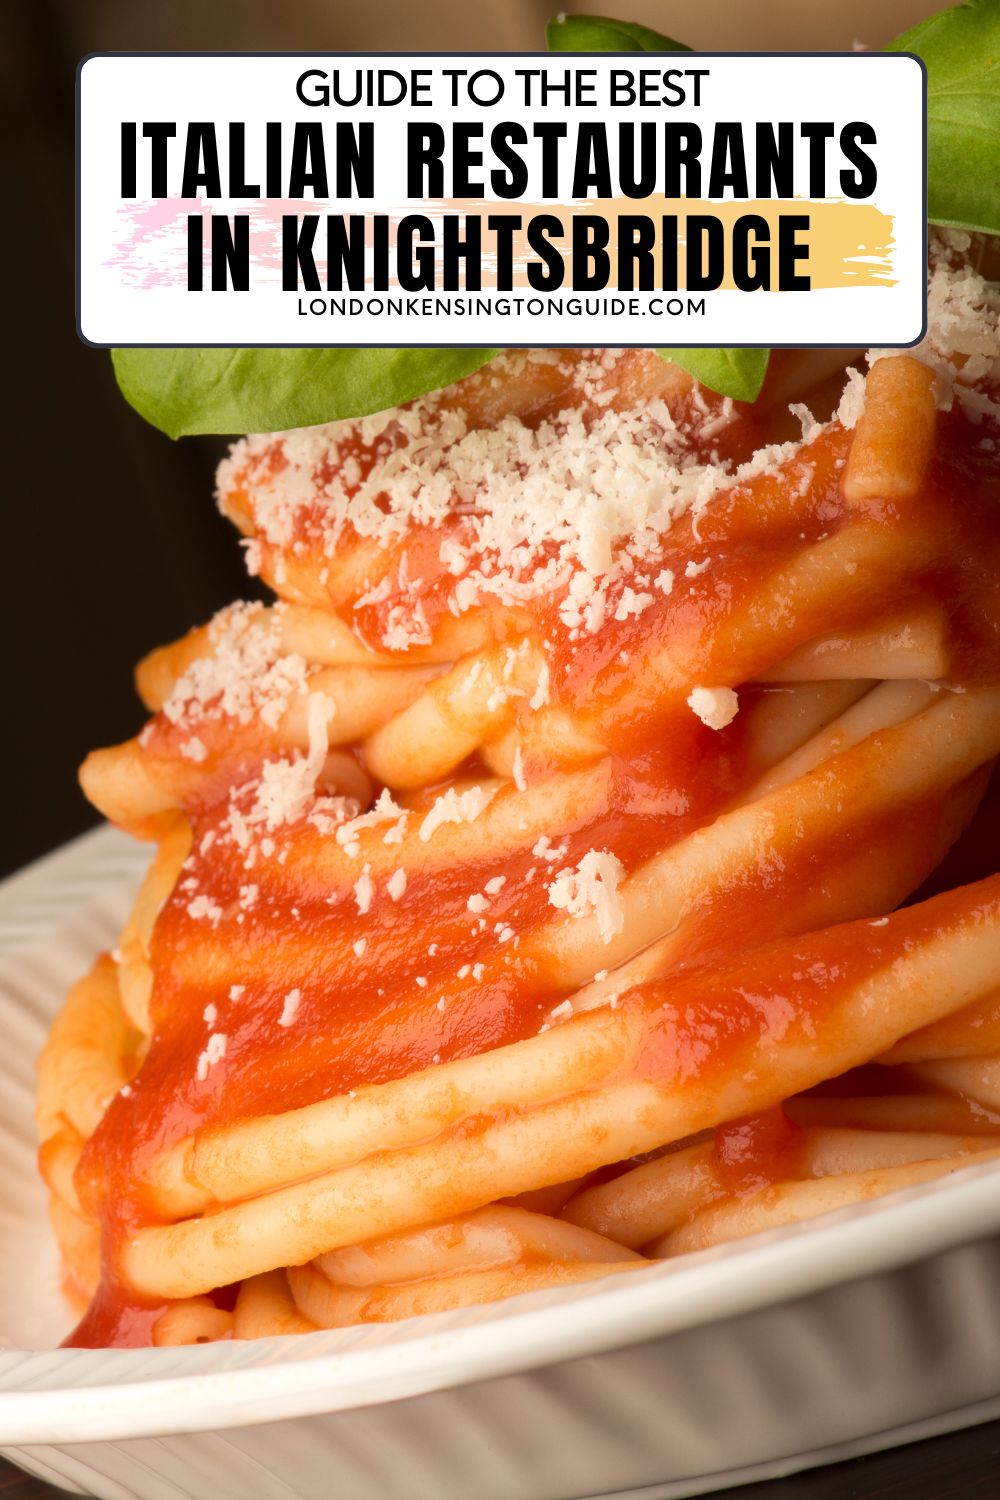 Guide to the best Italian restaurants in Knightsbridge. Whether you are looking for a pasta place, Pizzeria or just want food Italian food. We have you covered! italian restaurants in knightsbridge | italian knightsbridge | italian restaurant near harrods | italian restaurant knightsbridge near harrods | italian restaurant harrods | italian restaurants opposite harrods | scalini restaurant knightsbridge | italian restaurants near knightsbridge